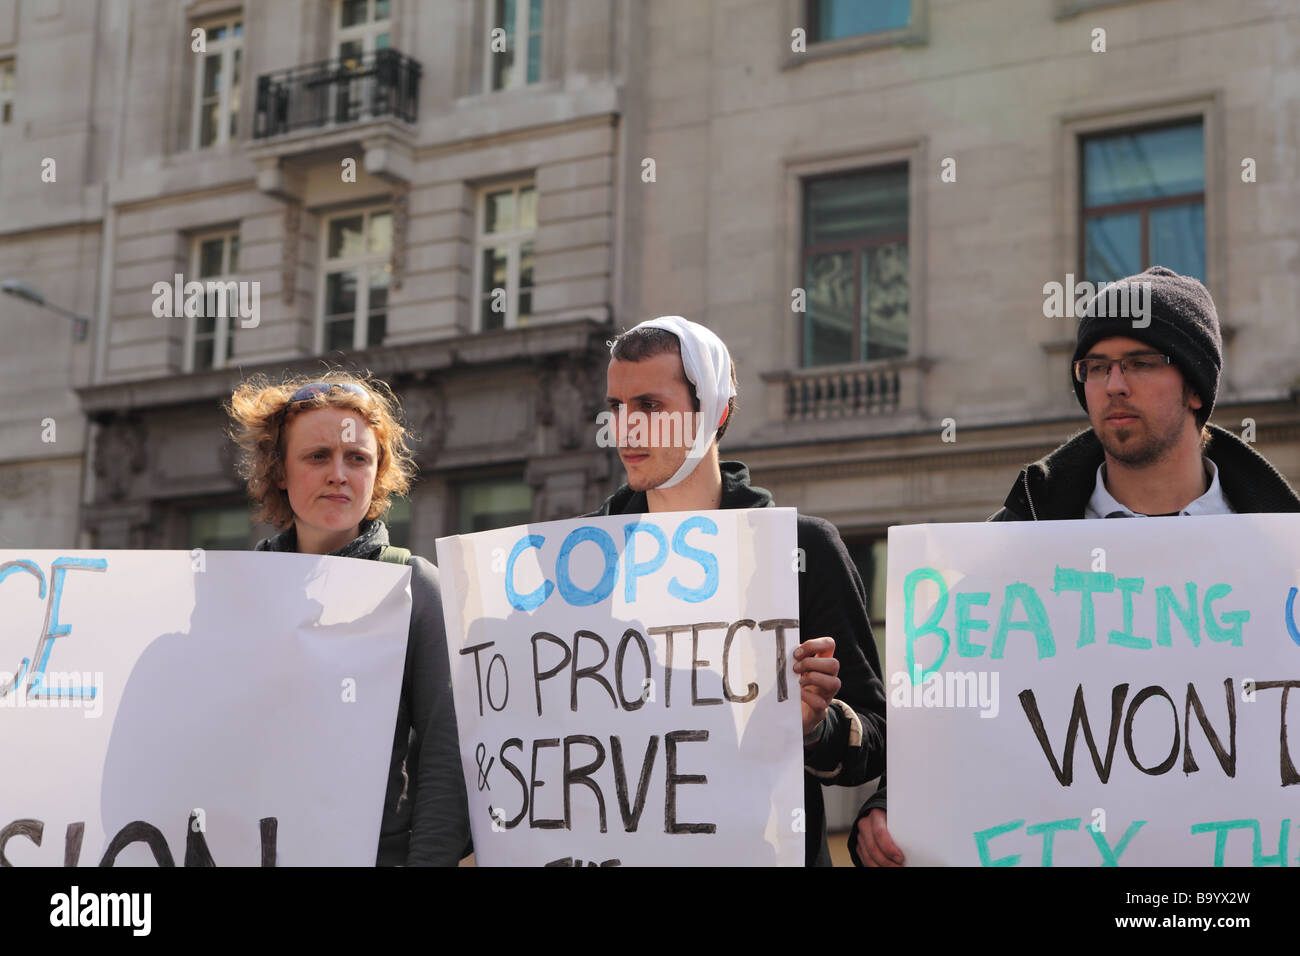 Protesters outside the Bank of England during the 2009 G20 summit, London, UK. Stock Photo